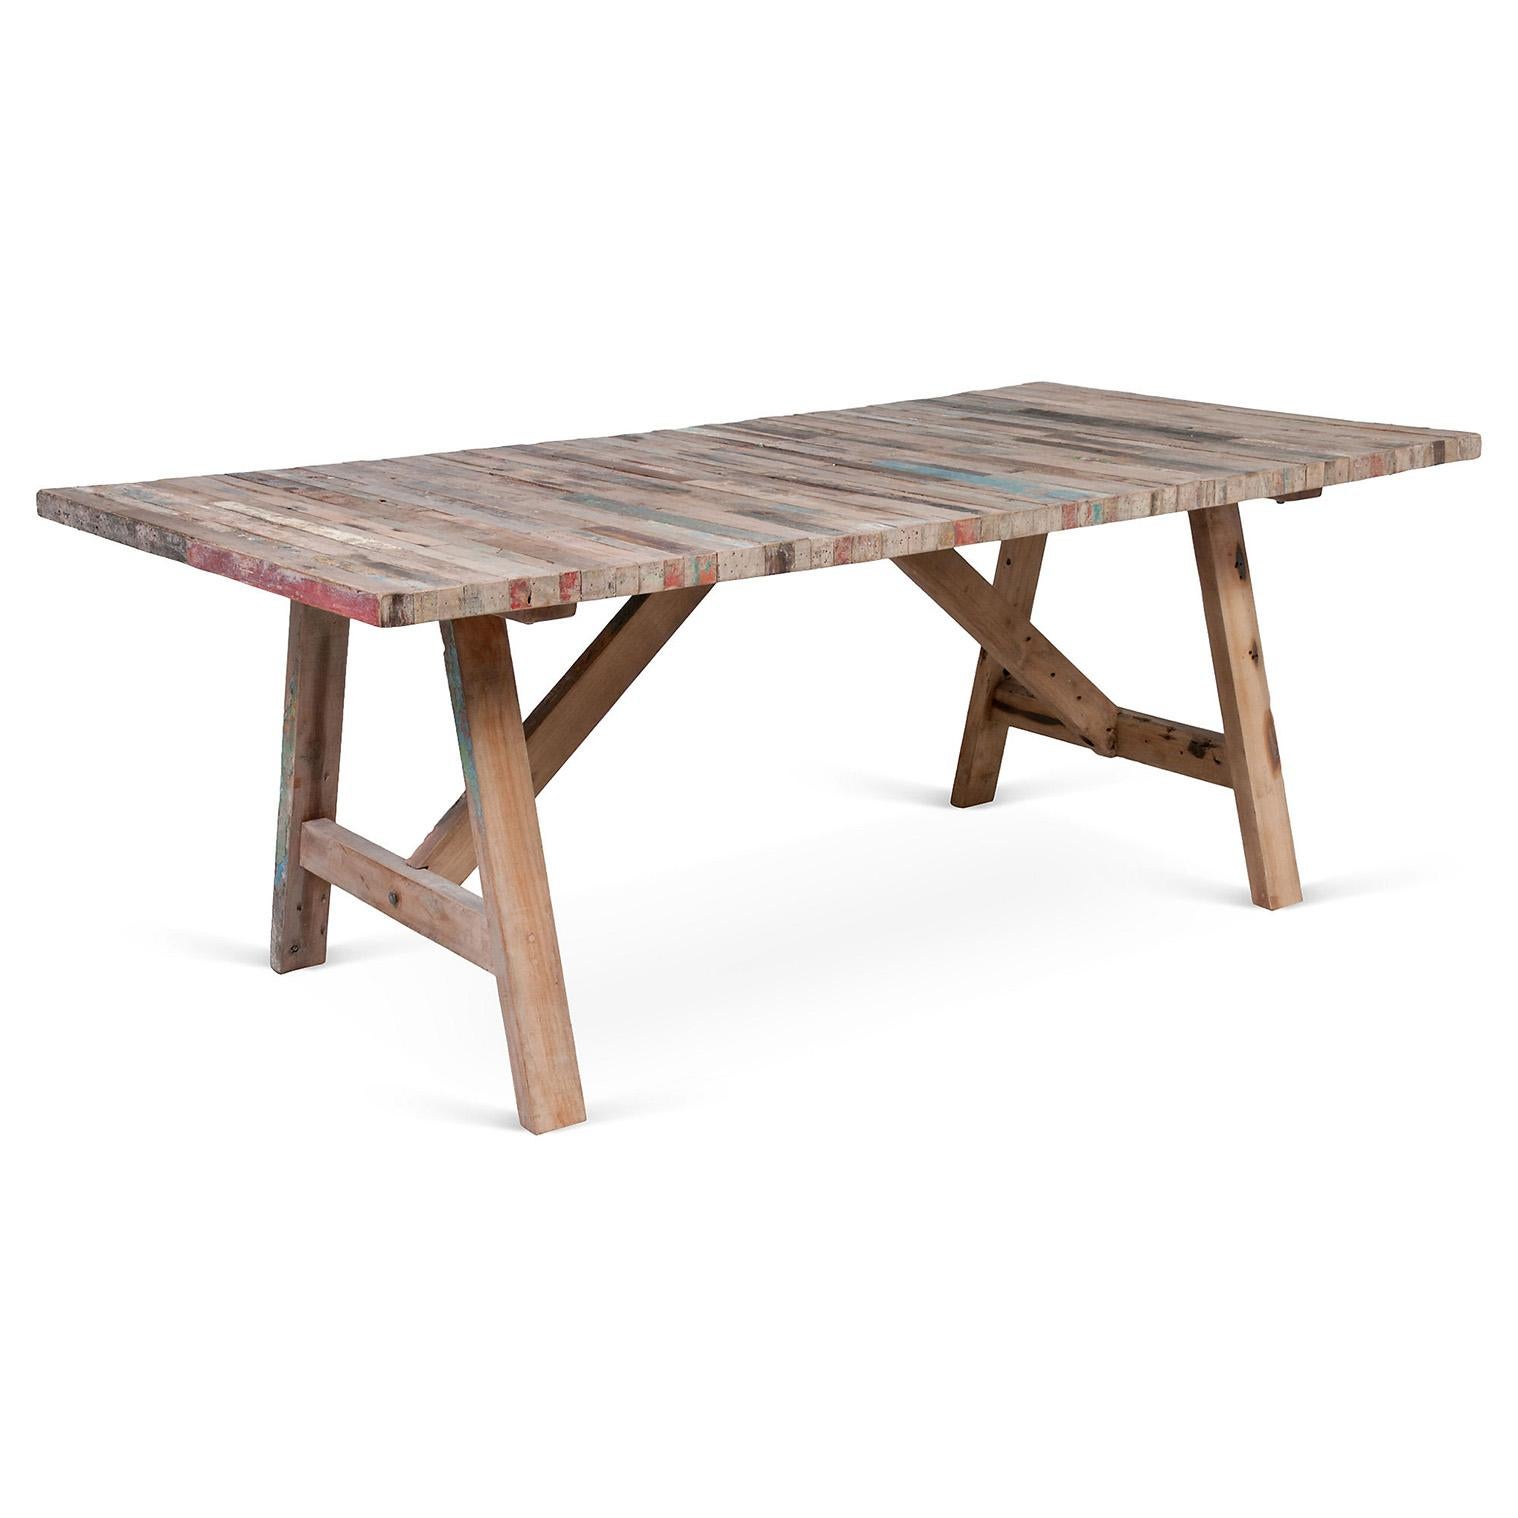 Crafted from a salvaged fishing boat in Bali, the wood in this trestle table will gain a natural patina over time; a unique piece made from wood, with brown and blue coloration.